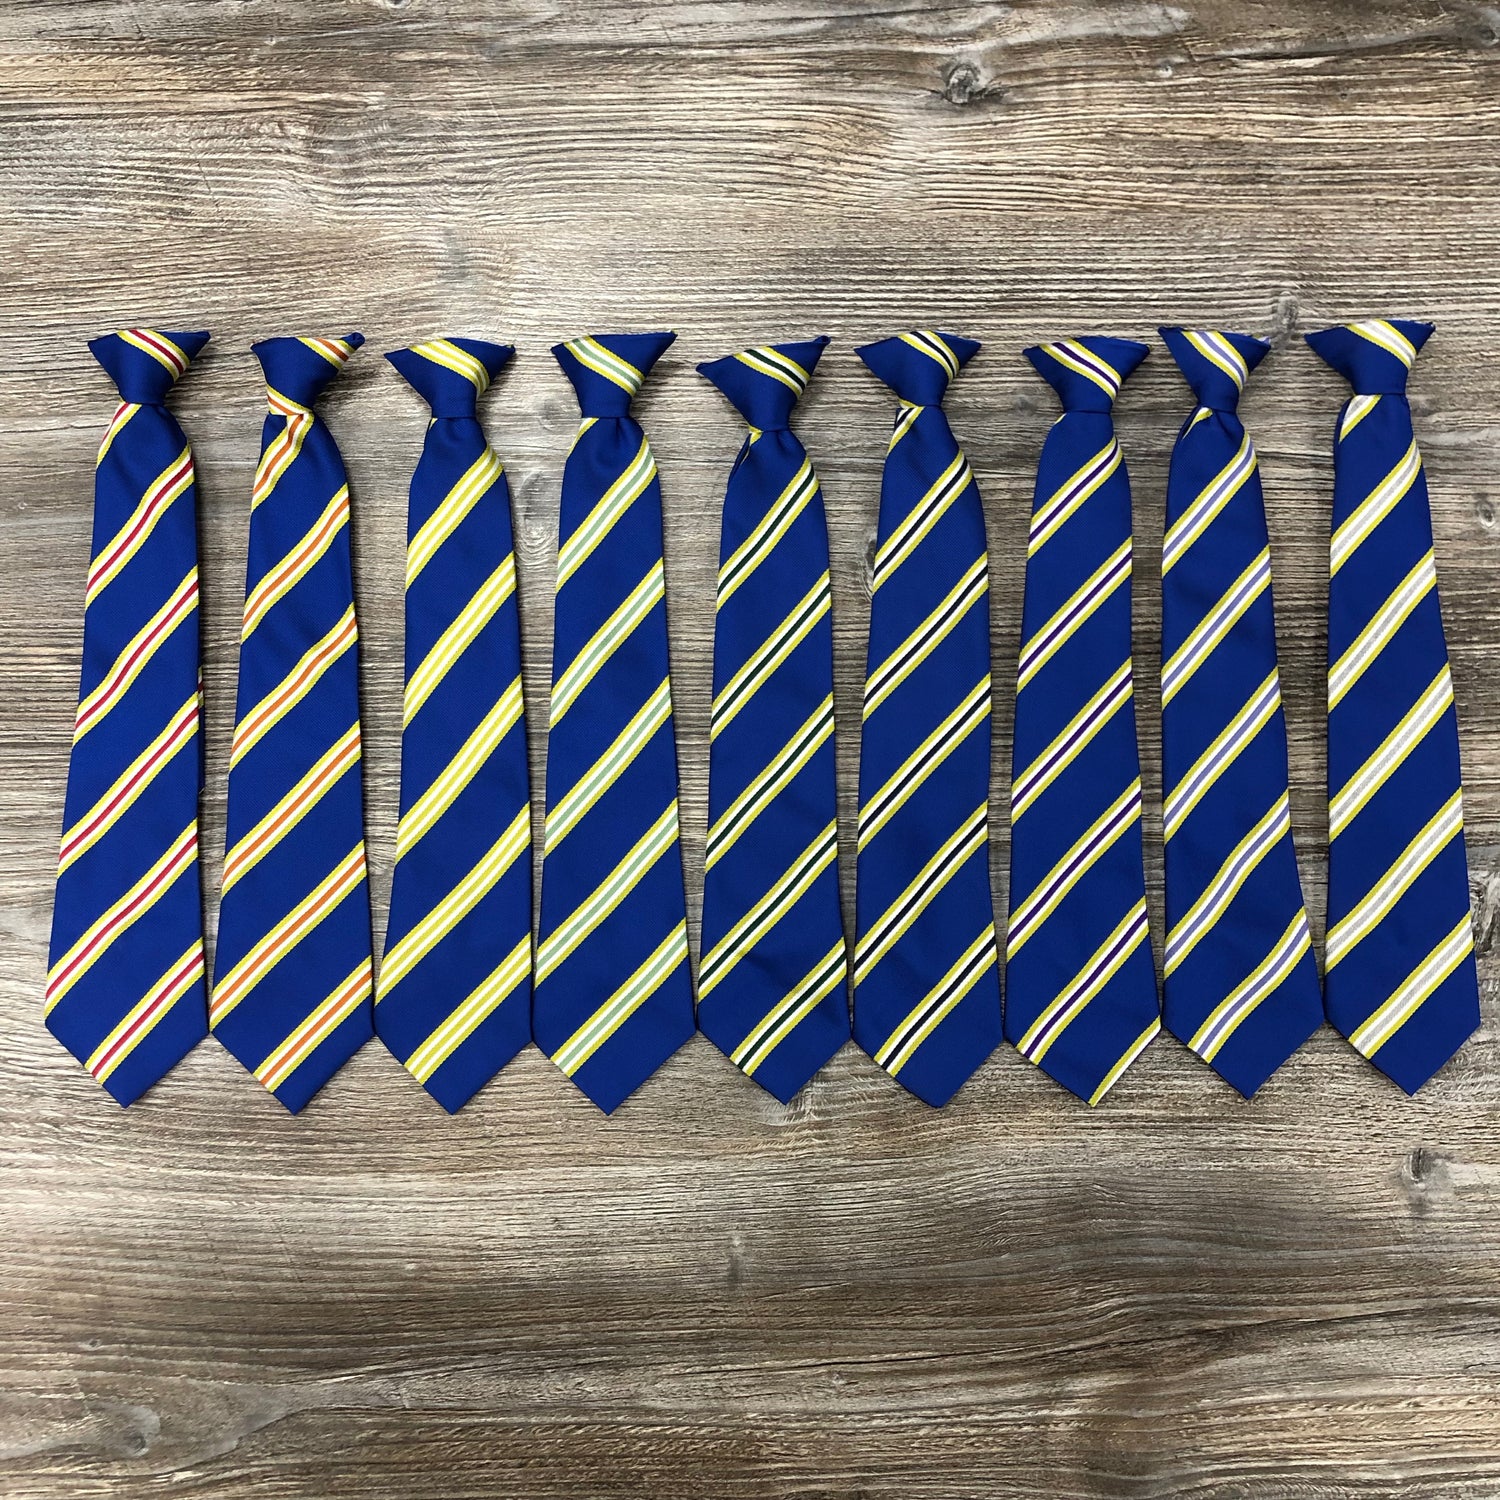 Blessed Trinity College House Ties